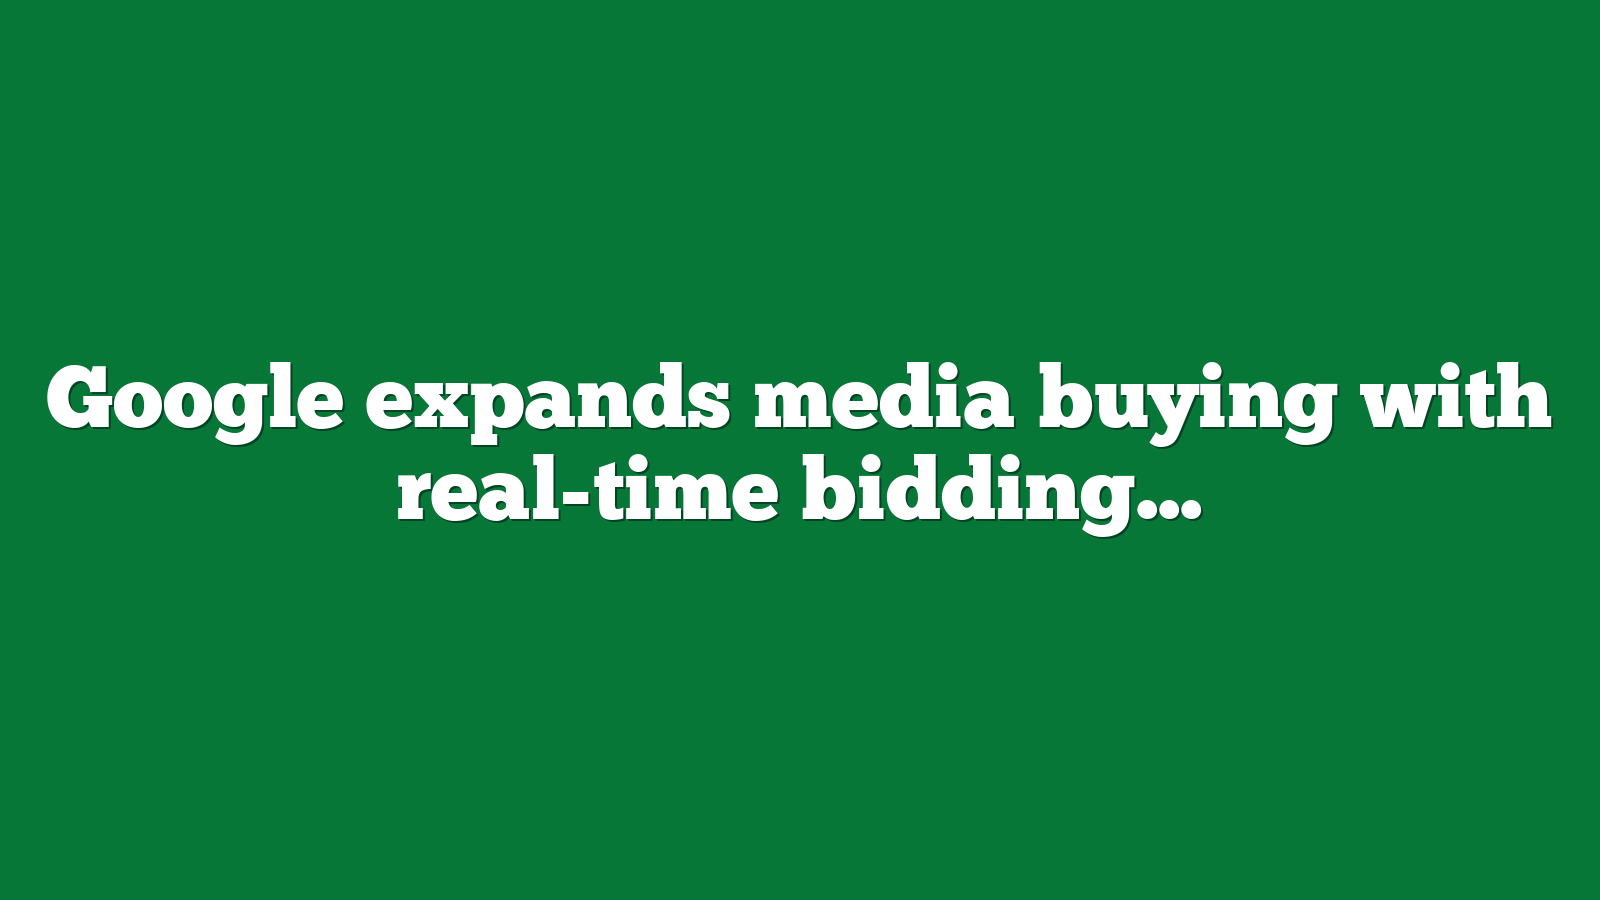 Google expands media buying with real time bidding integrations